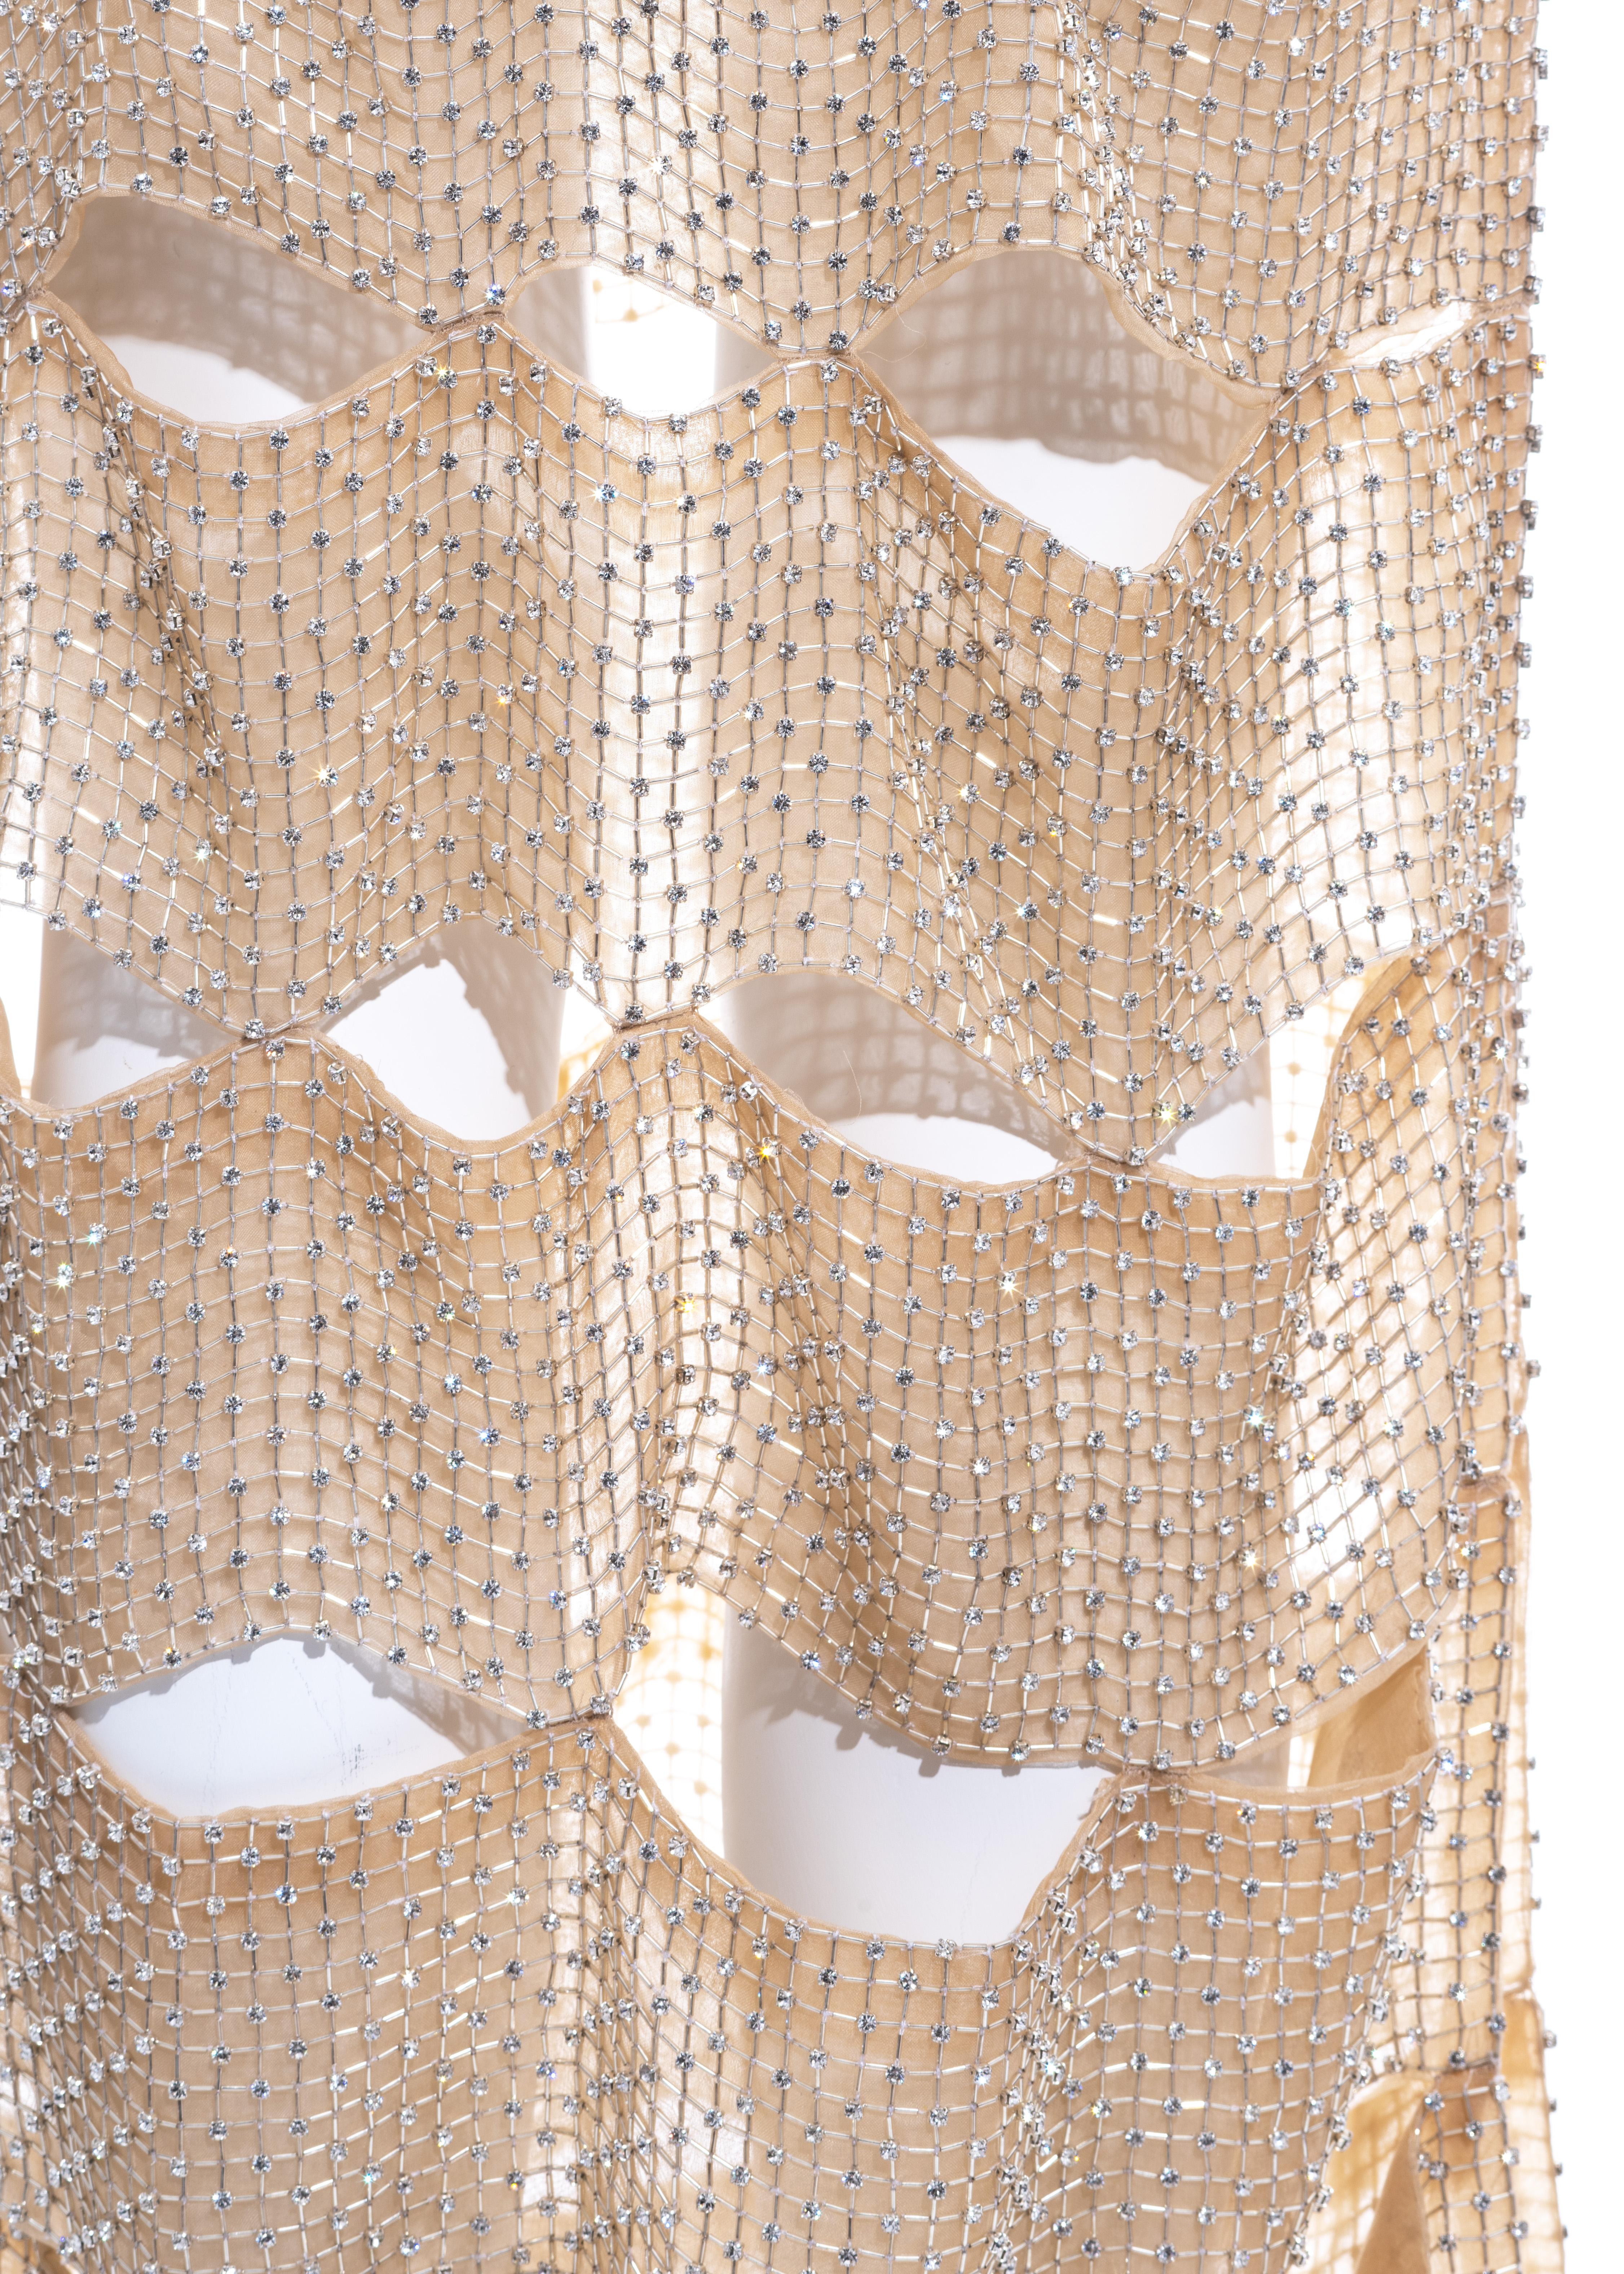 Women's Tom Ford nude silk organza evening dress in a lattice of glass beads, ss 2013